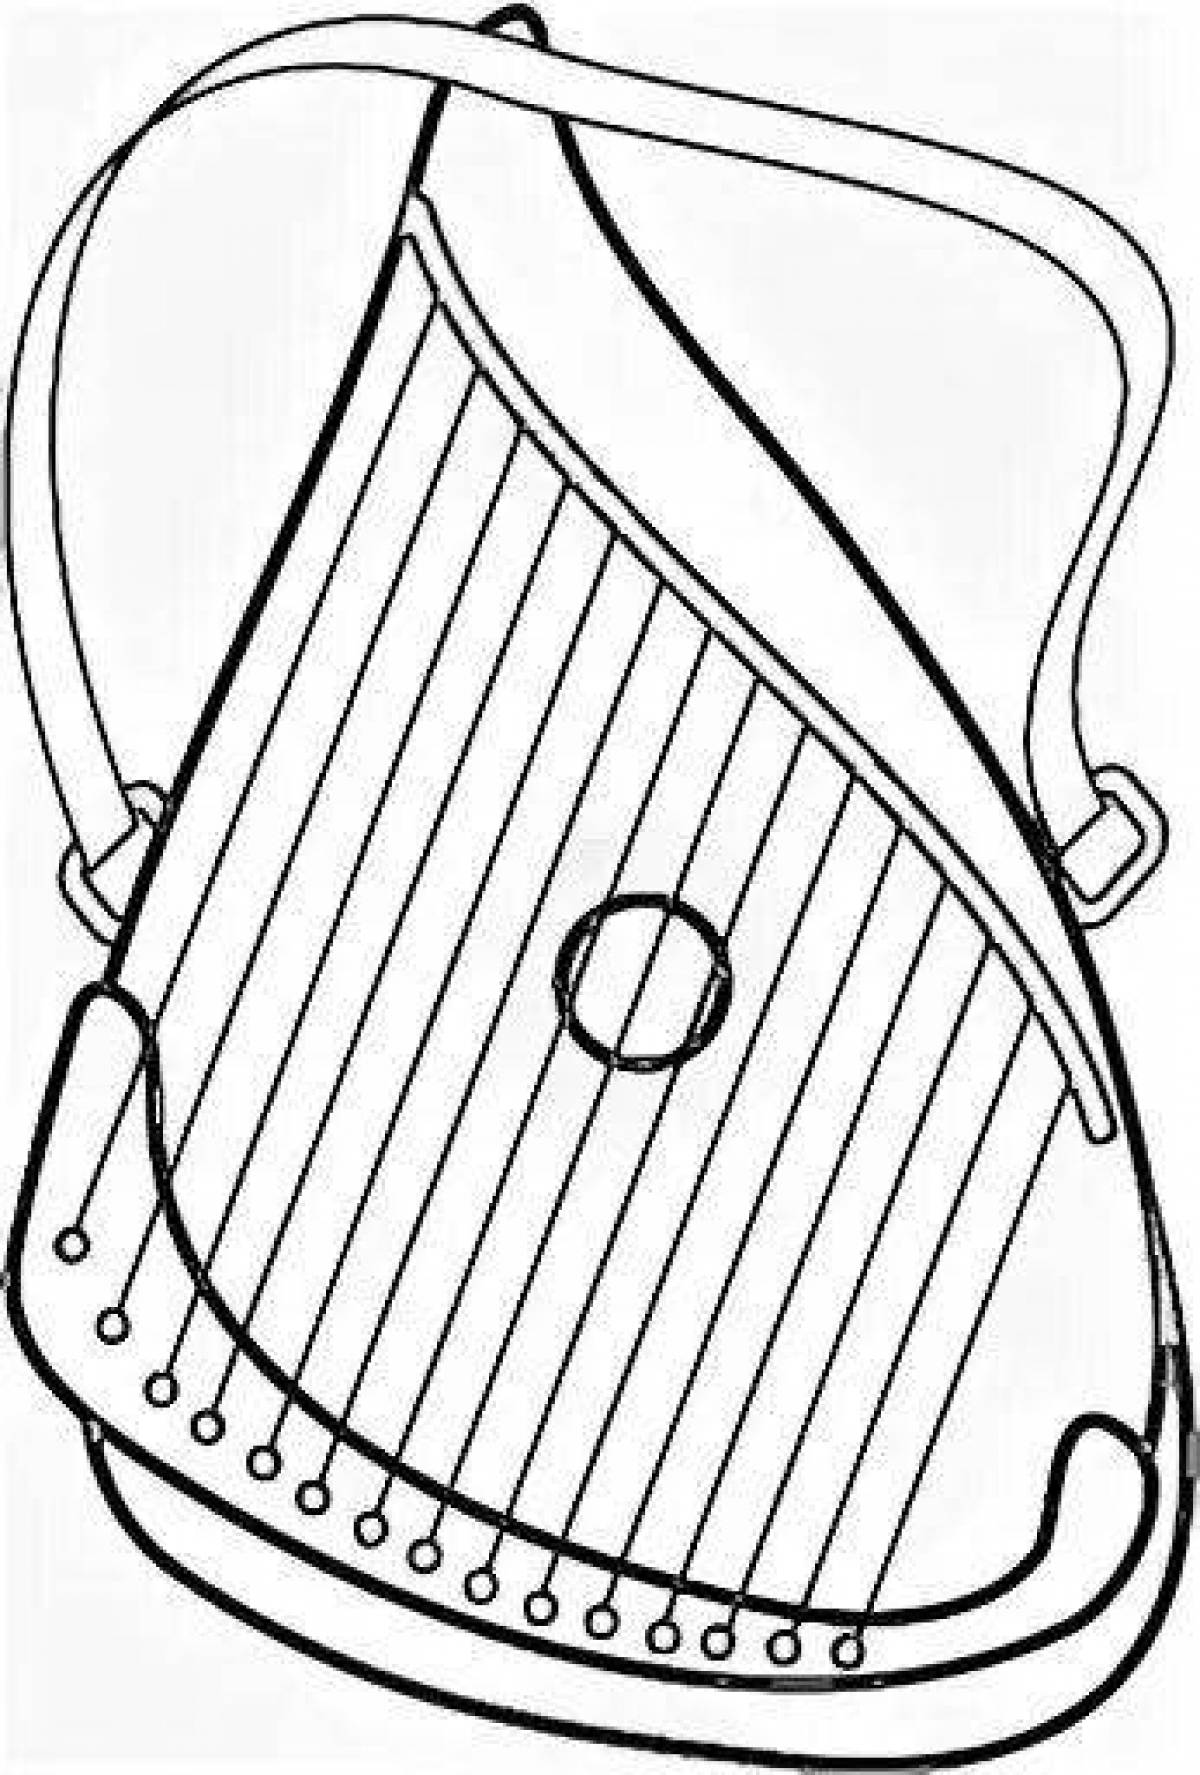 Coloring book colorful musical instrument psaltery